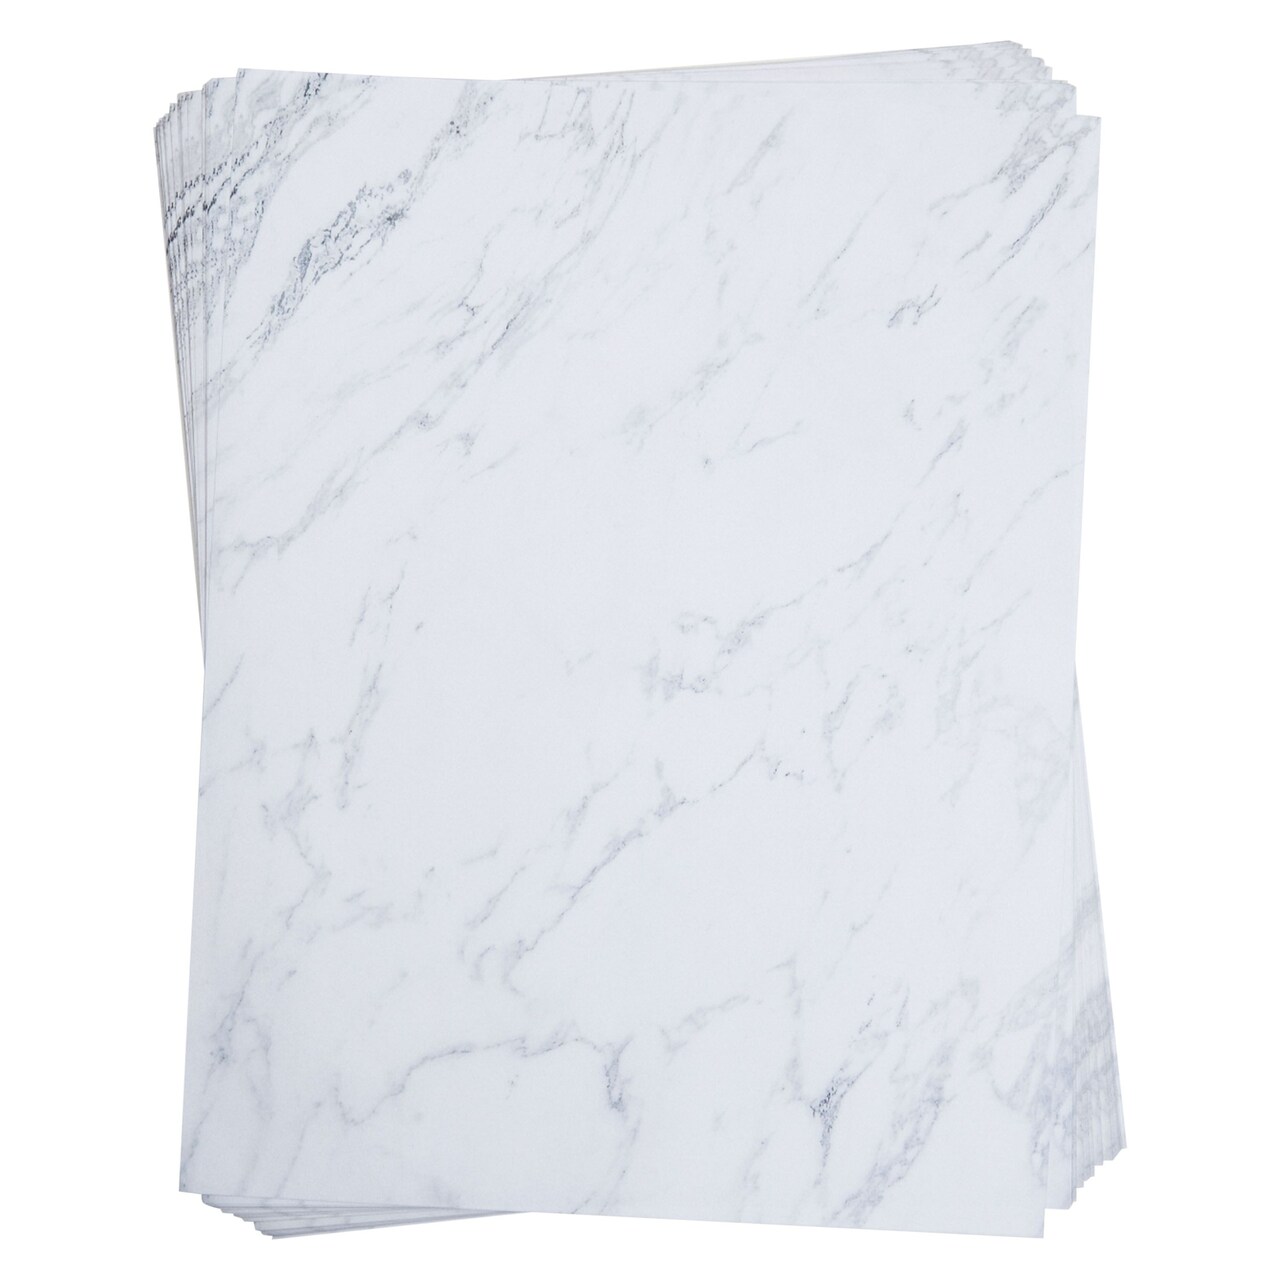 Marble Stationery Paper, Printer Friendly Decorative Letterhead (8.5 x 11 In, 48 Sheets)